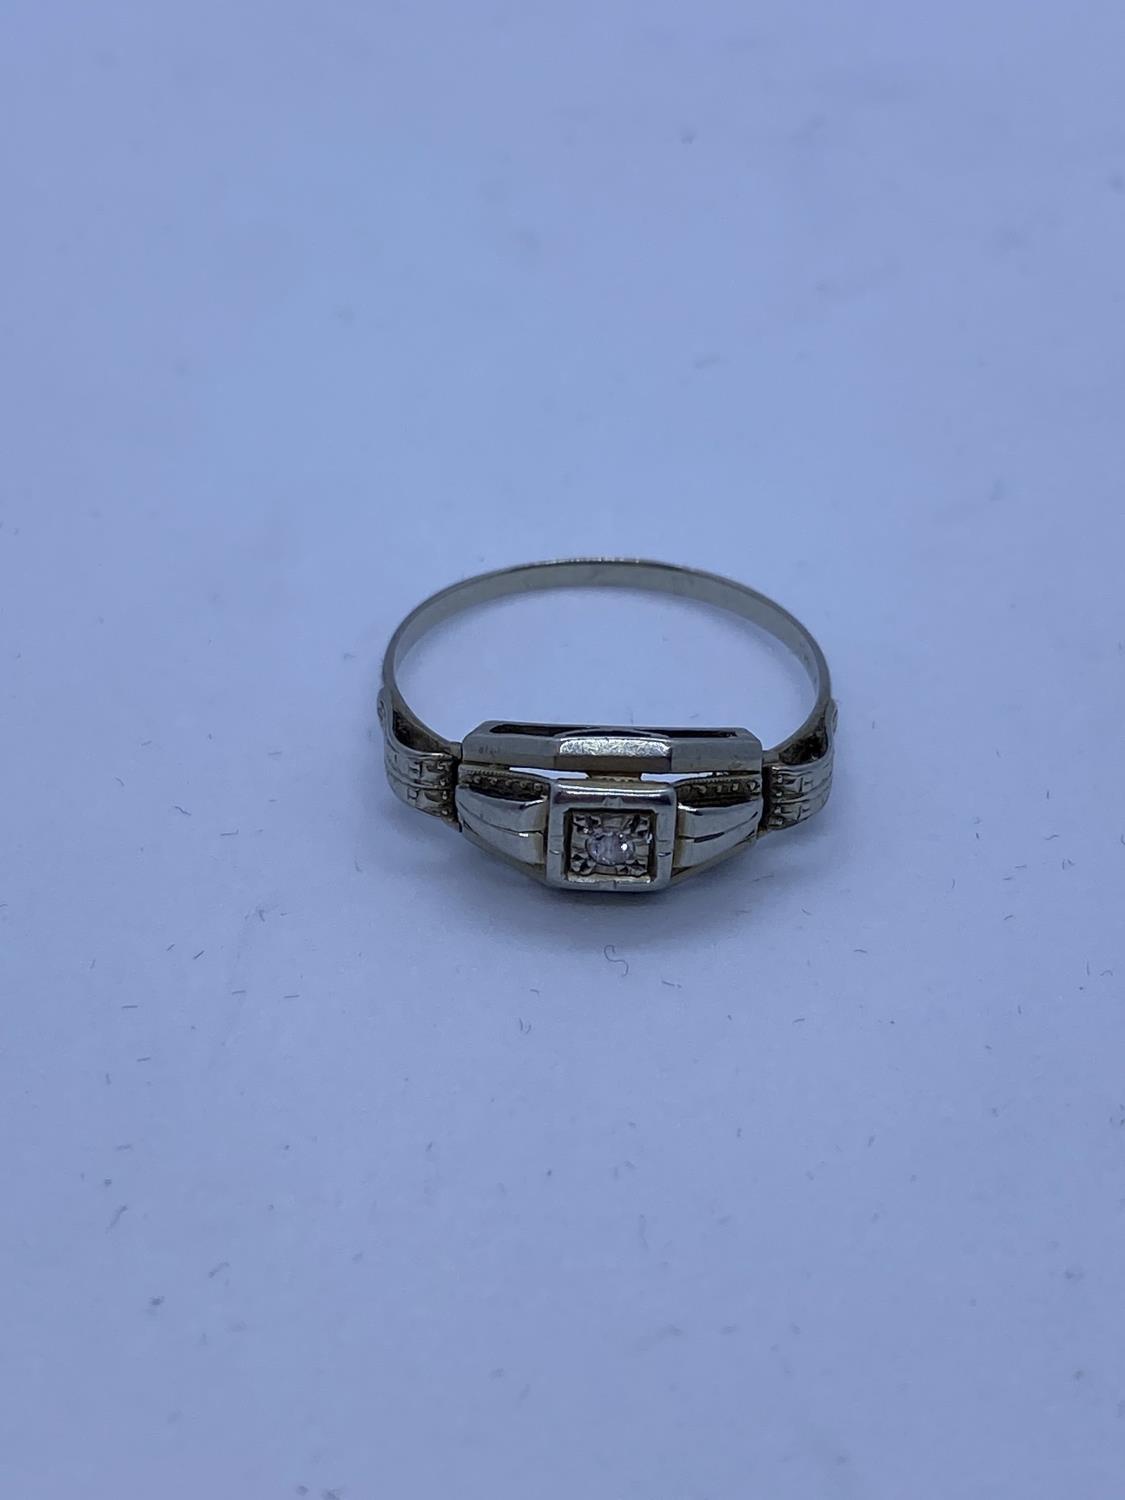 Vintage 18ct Gold Ring with Small Diamond, 1.8, Size P. - Image 5 of 5